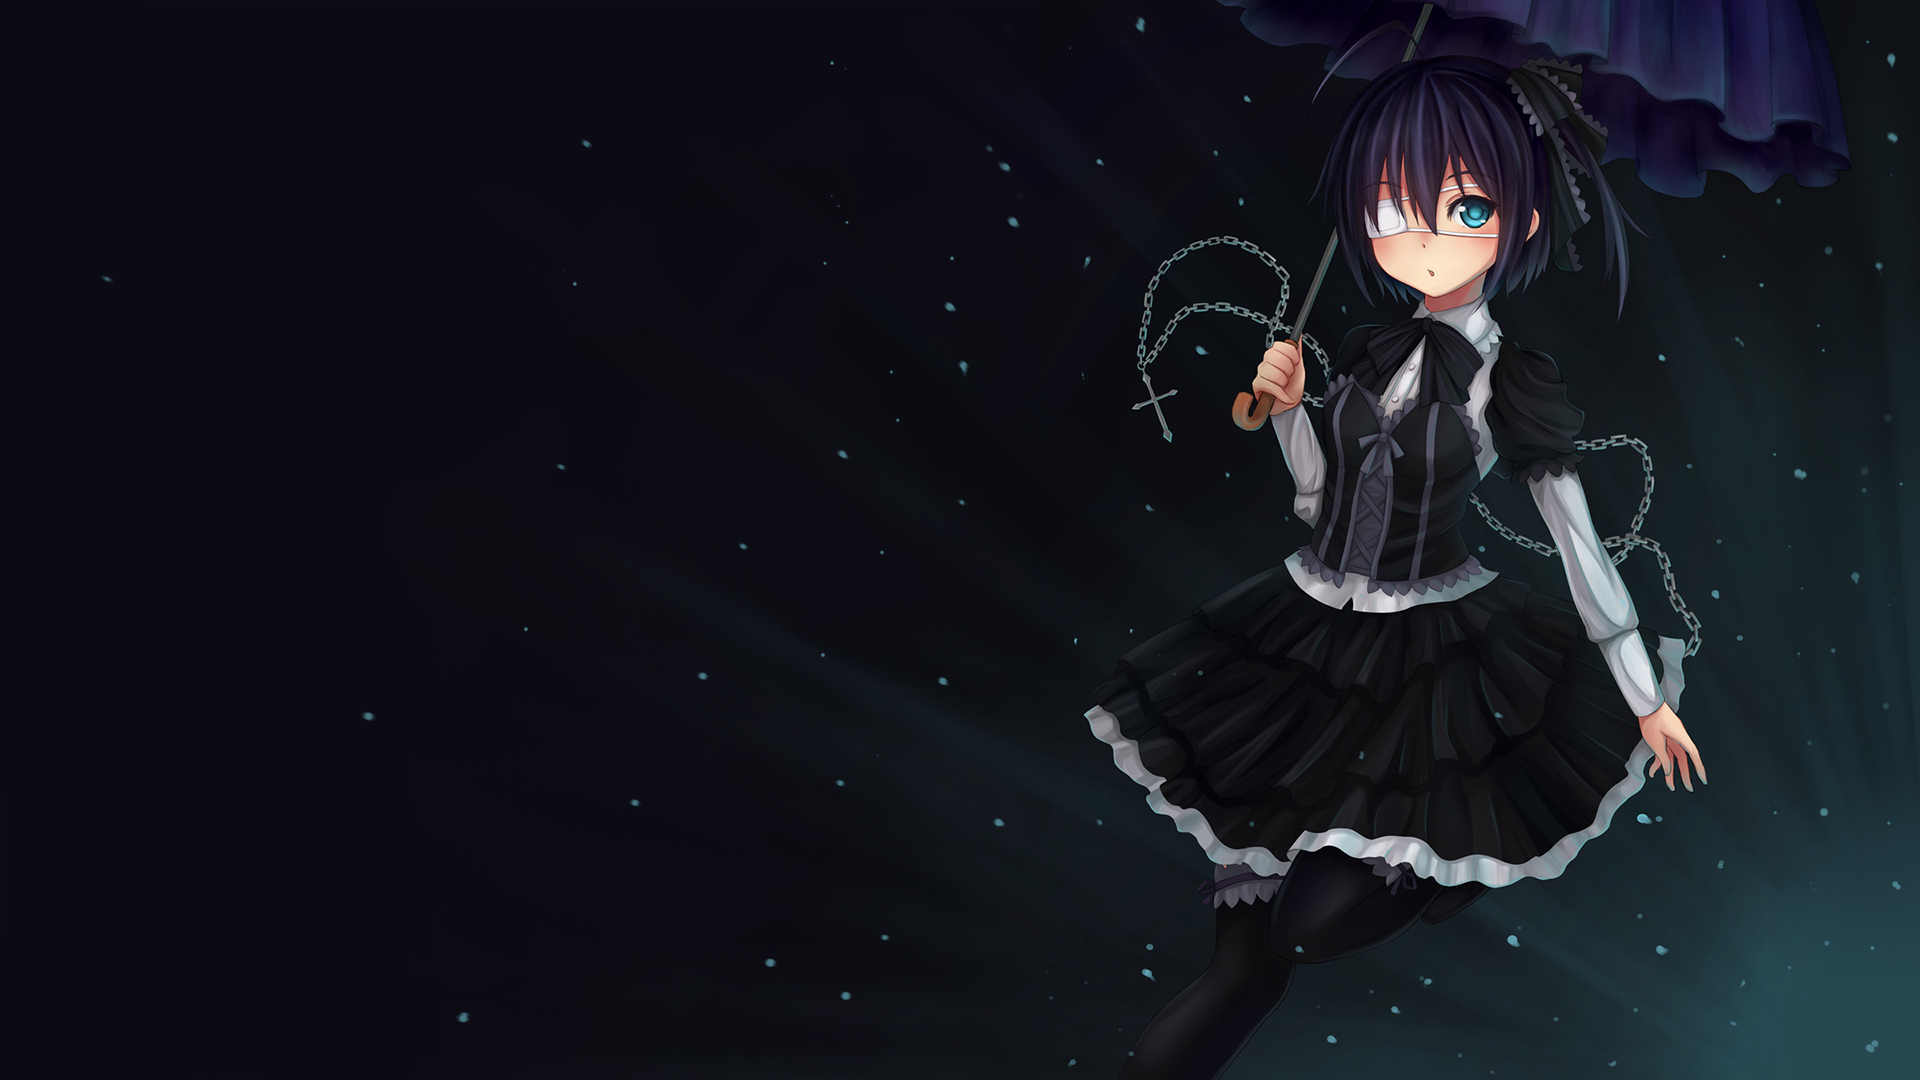 Love Chunibyo Other Delusions HD Wallpaper Background Image